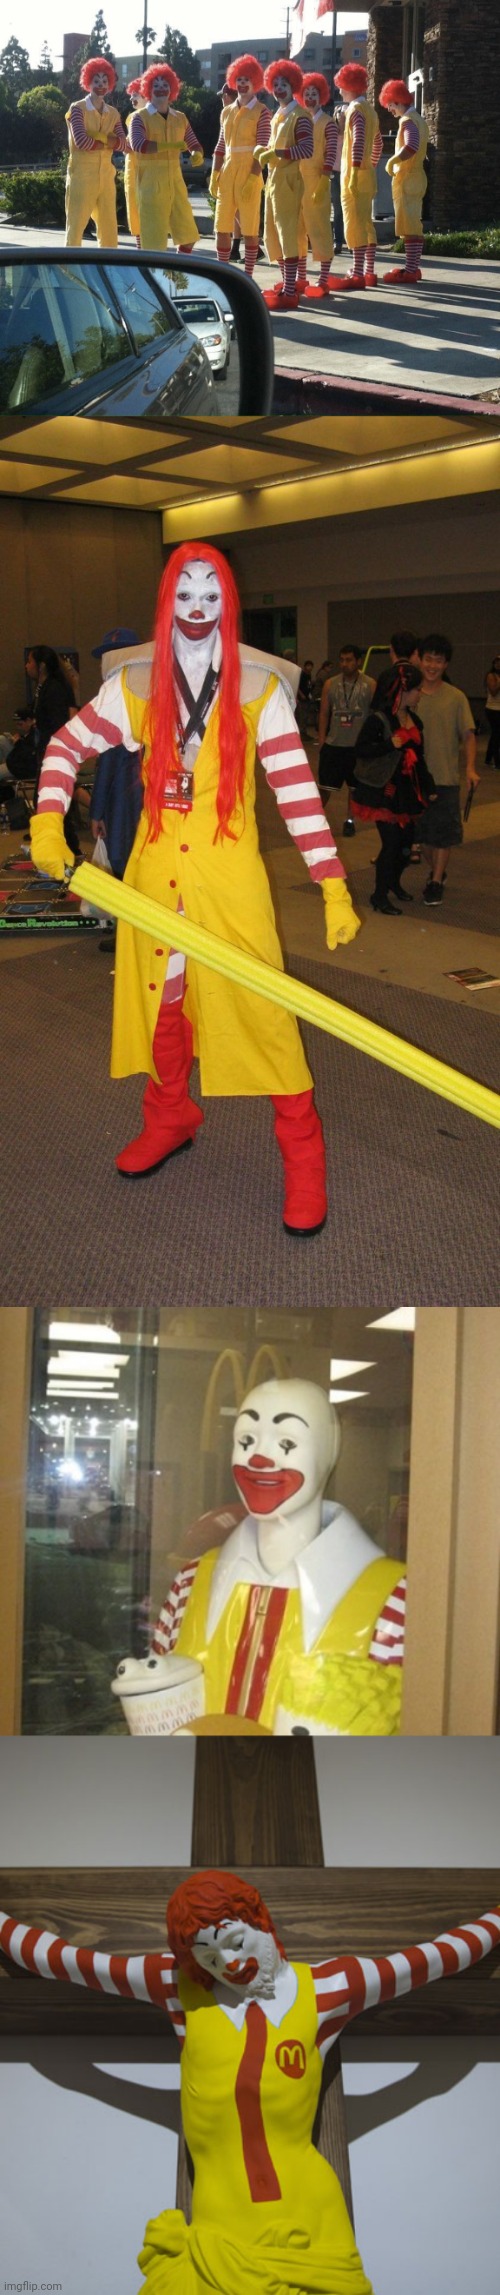 image tagged in memes,ronald mcdonald,cursed image,funny | made w/ Imgflip meme maker